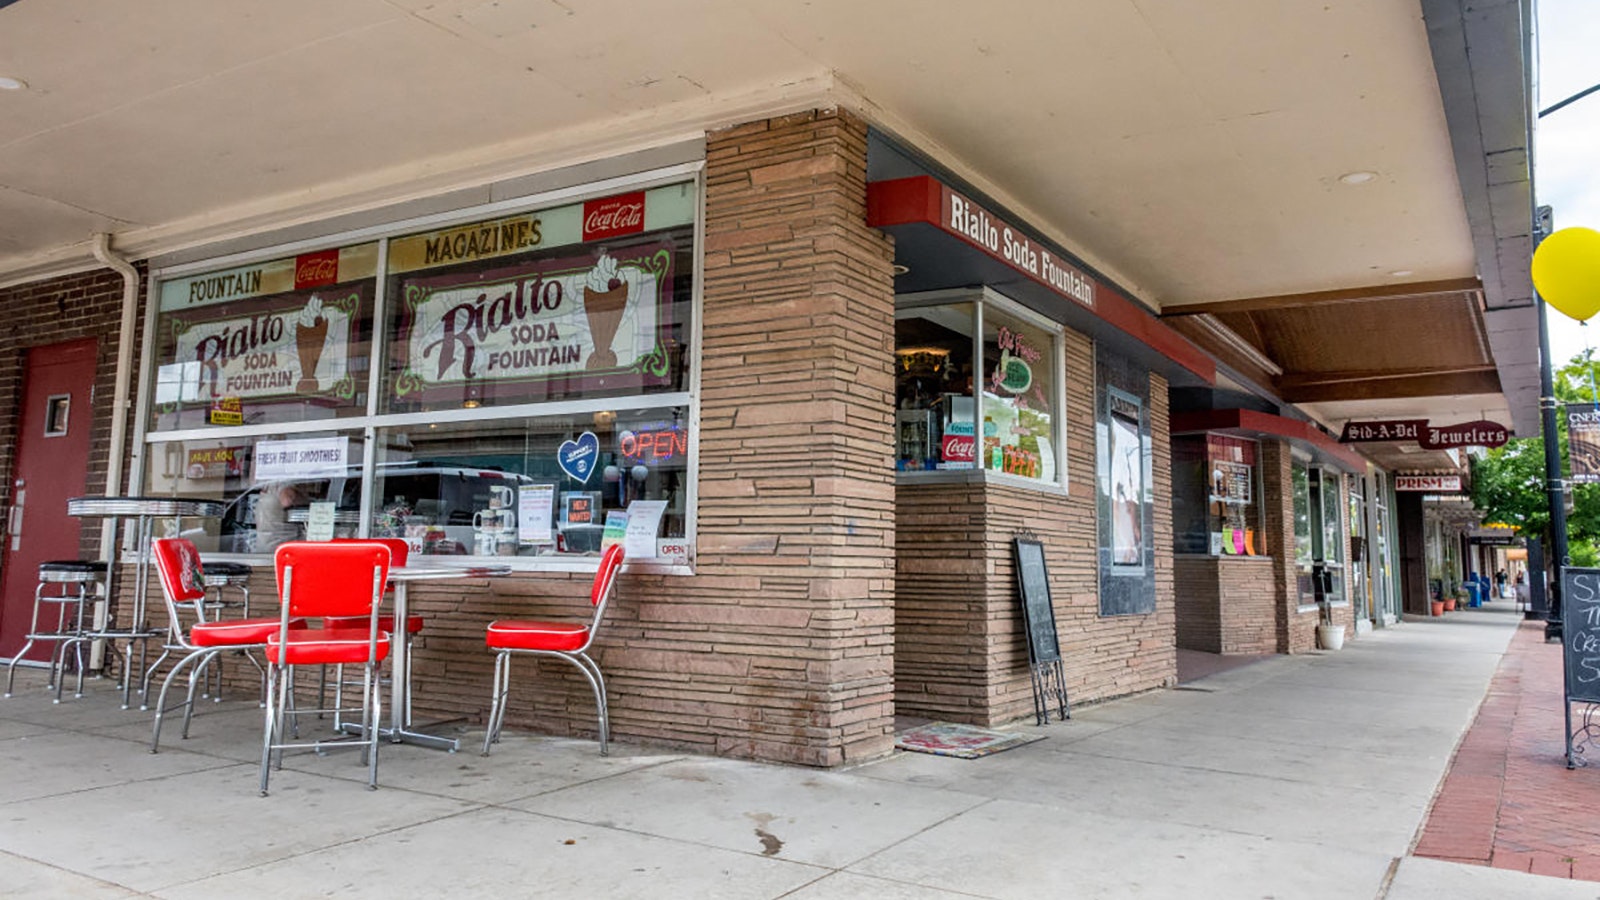 The Rialto Soda Fountain at the corner of Second Street and South Center in Casper, Wyoming.